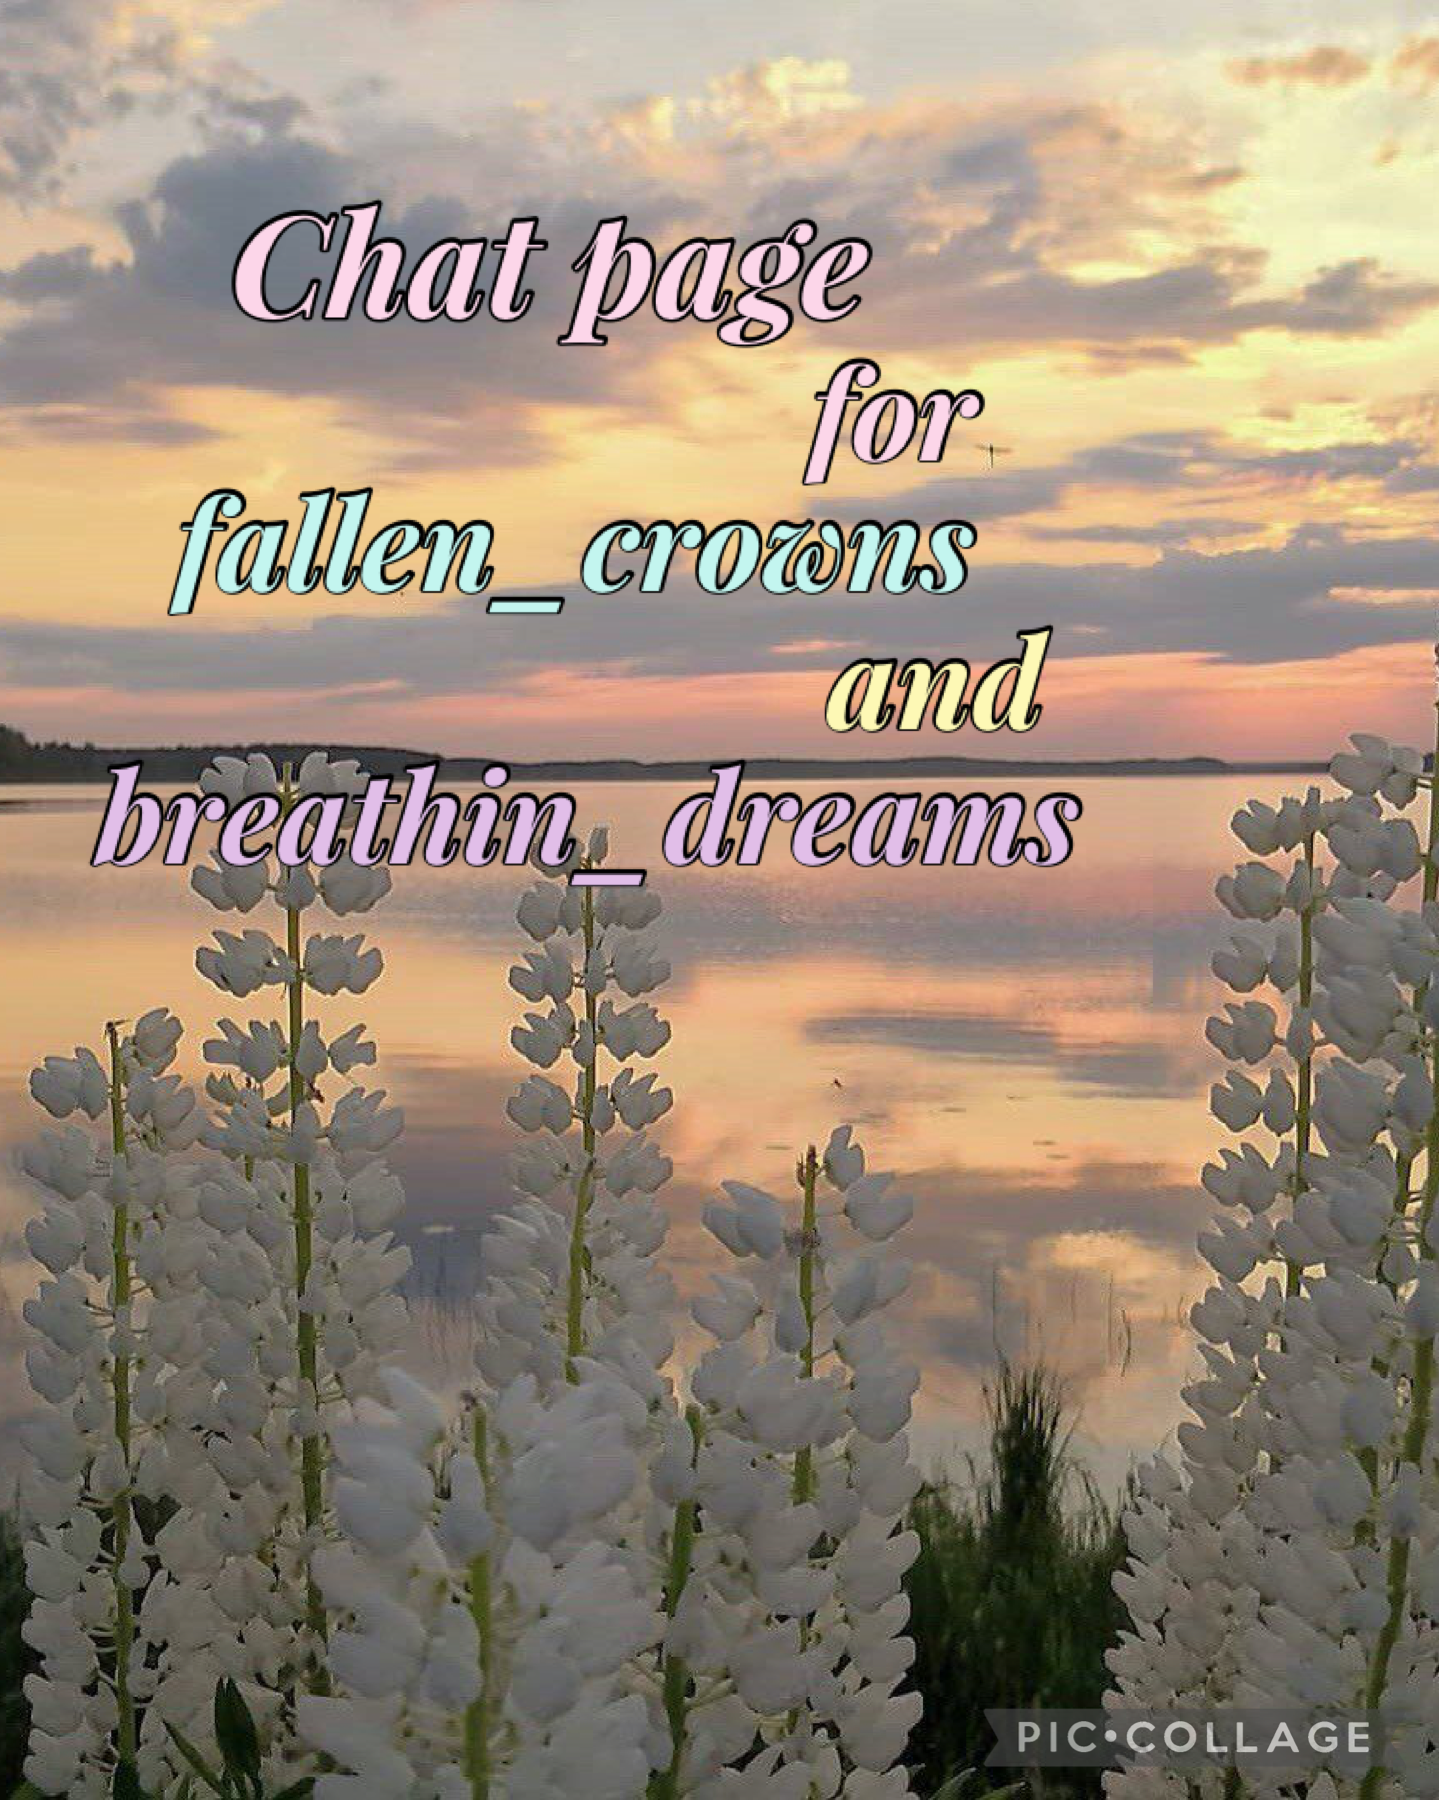 6.1.24 Chat page with fallen-crowns